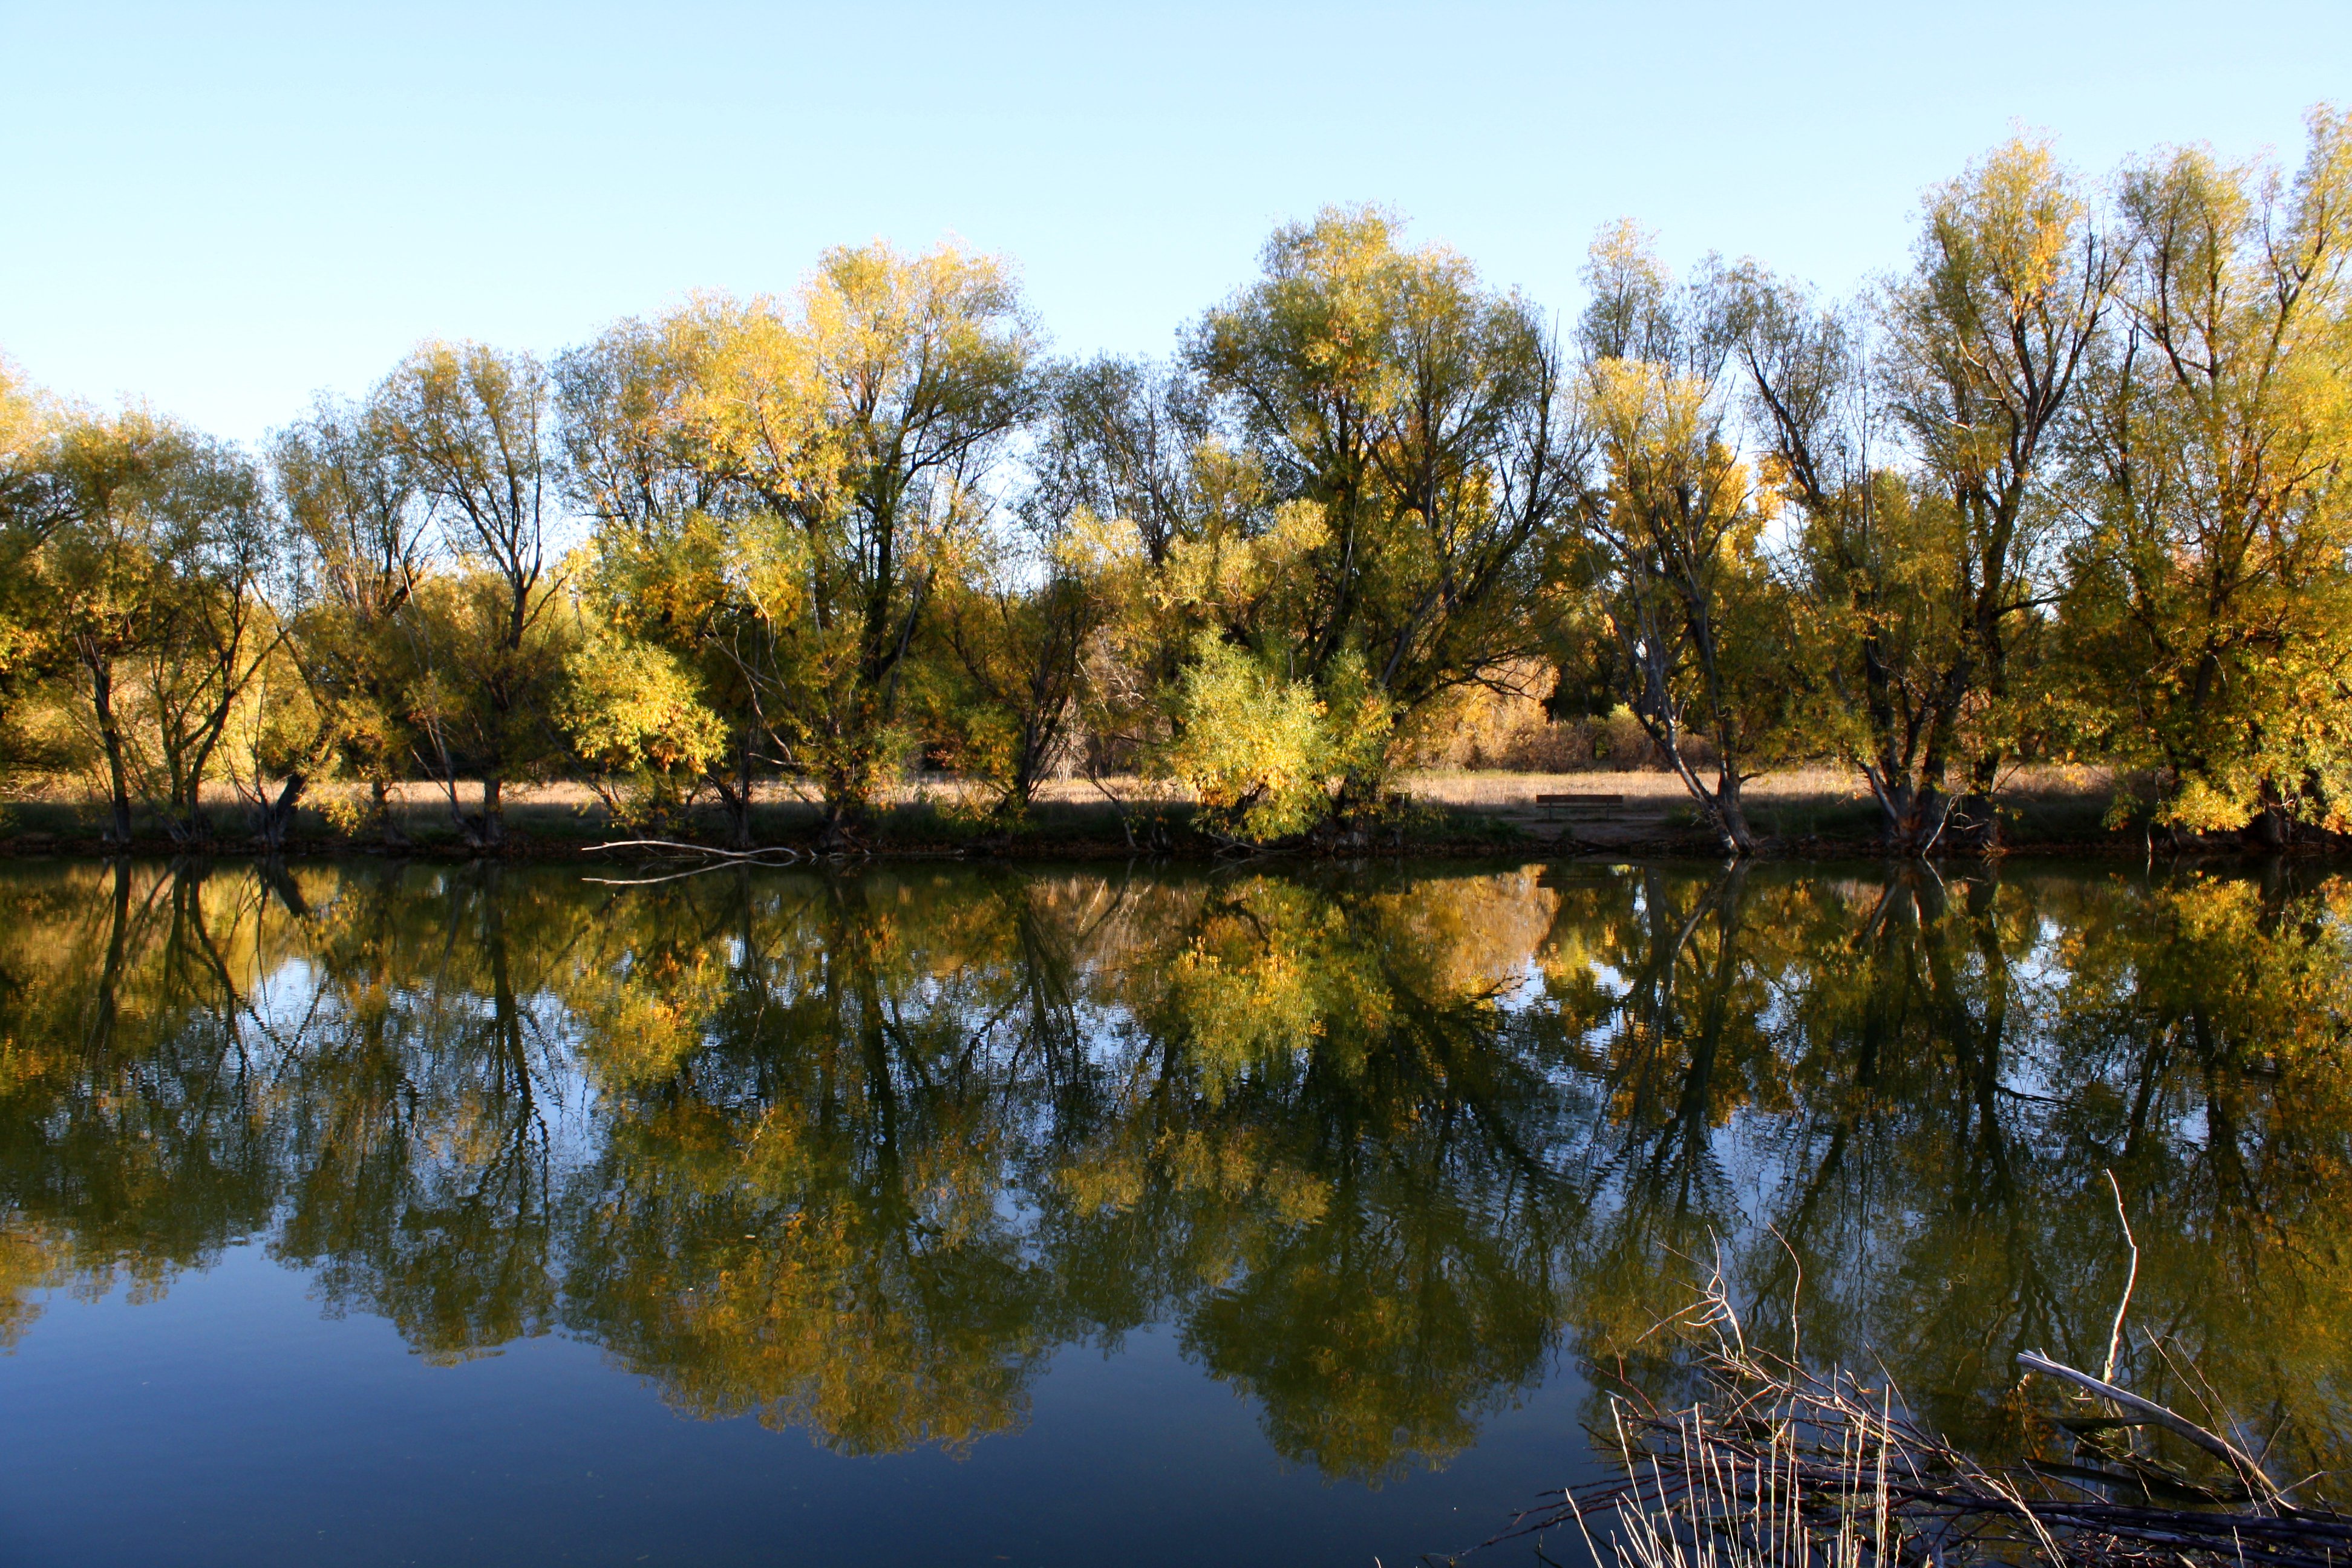 Sun on Autumn Trees Reflected in Water Picture | Free Photograph ...